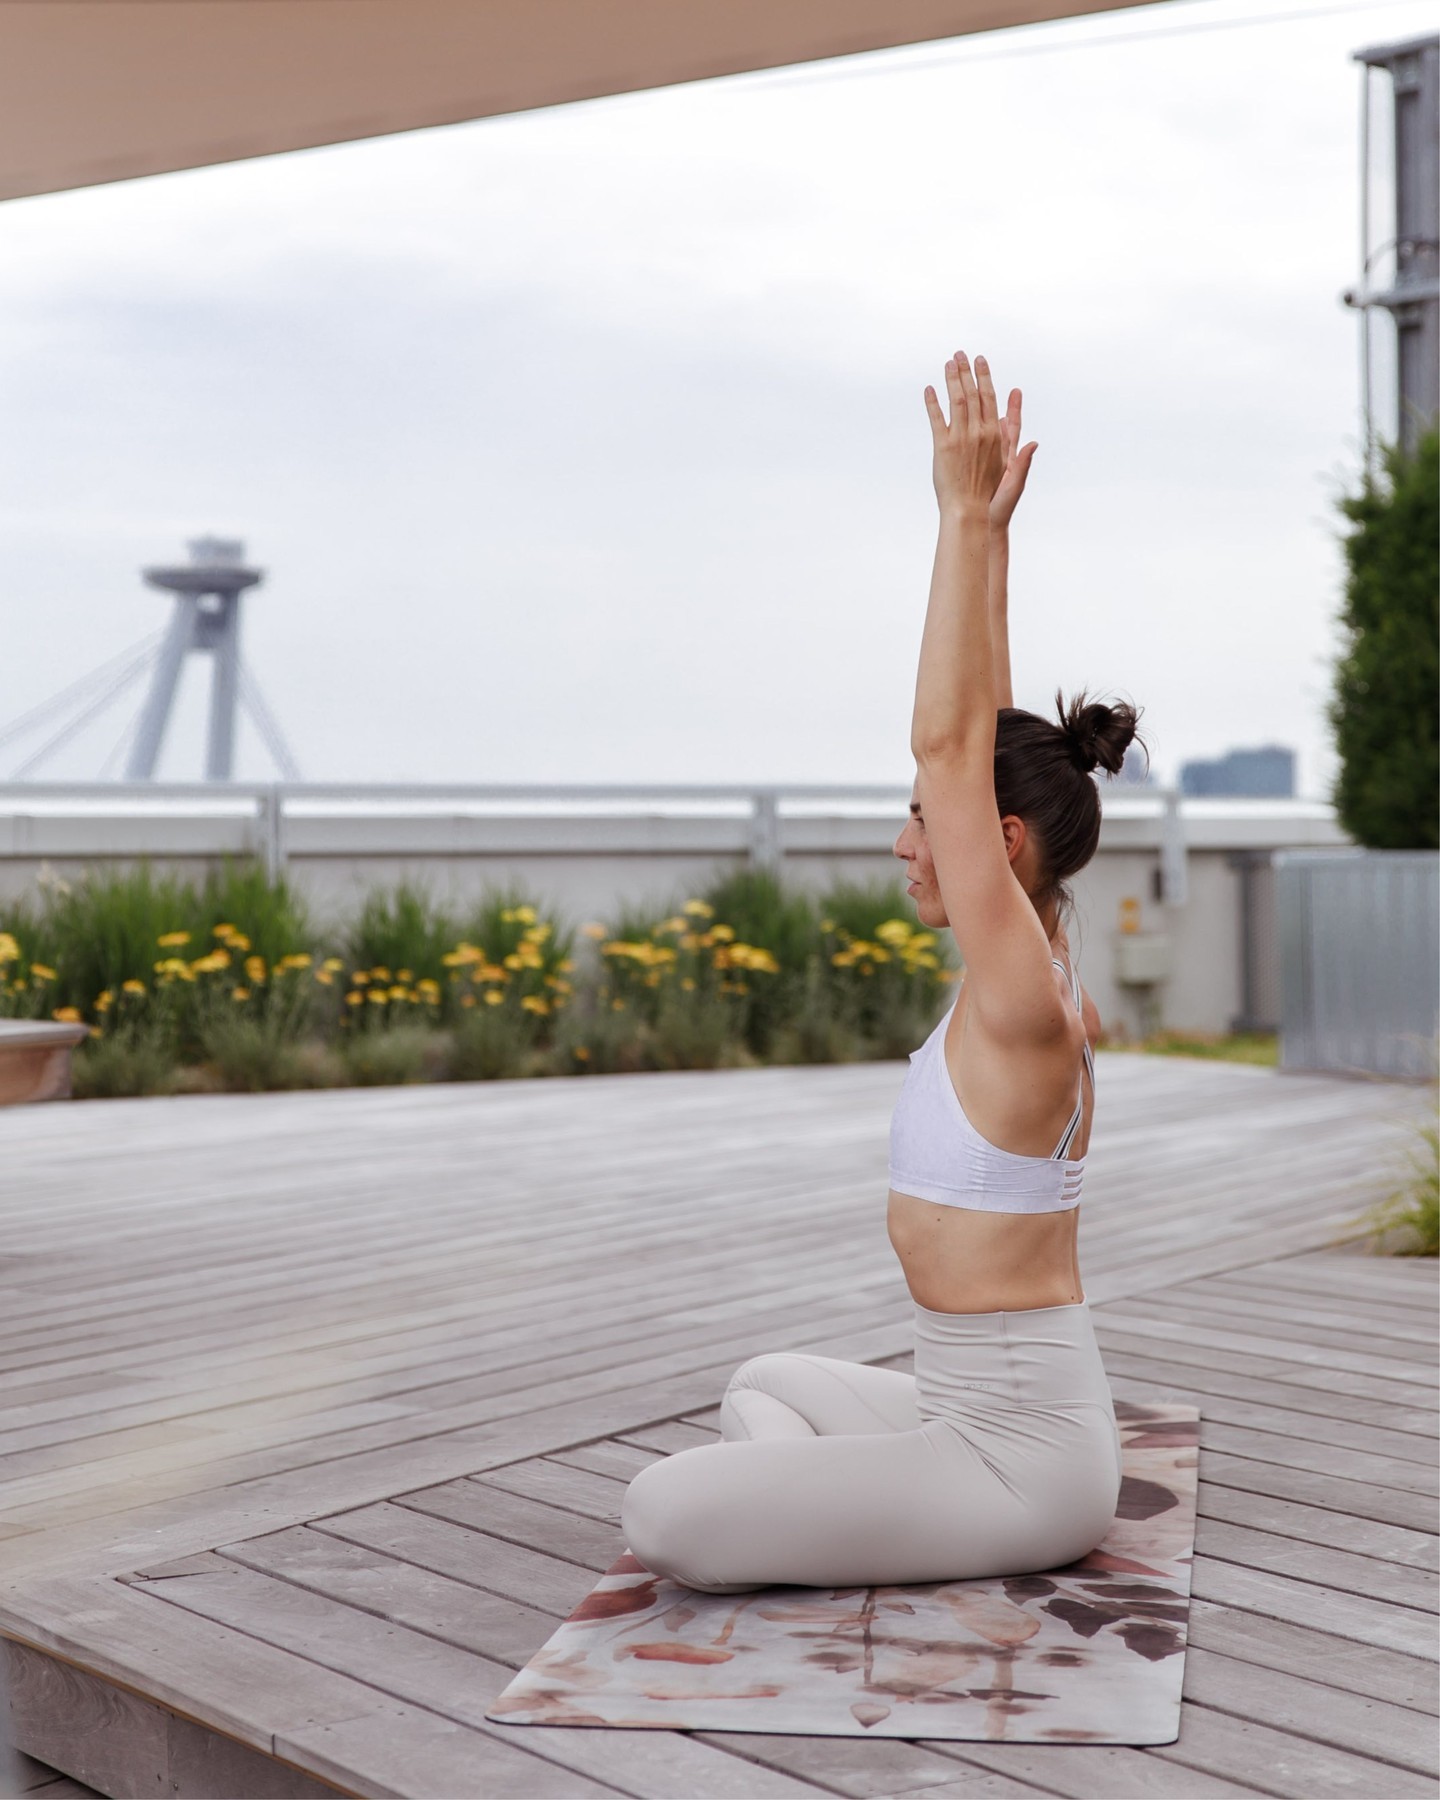 What a fantastic way to start the day! 🧘‍♂️ Morning yoga on the rooftop of the #Einpark building. 🌇🌱 Our tenants can enjoy stunning city views while practicing yoga on Bratislava’s greenest roof. 🌳🌿

#yogasession #einparkbuilding #LEEDZeroCarbon #sustainability #wellness #healthylifestyle #yogaontheroof #Slovakia